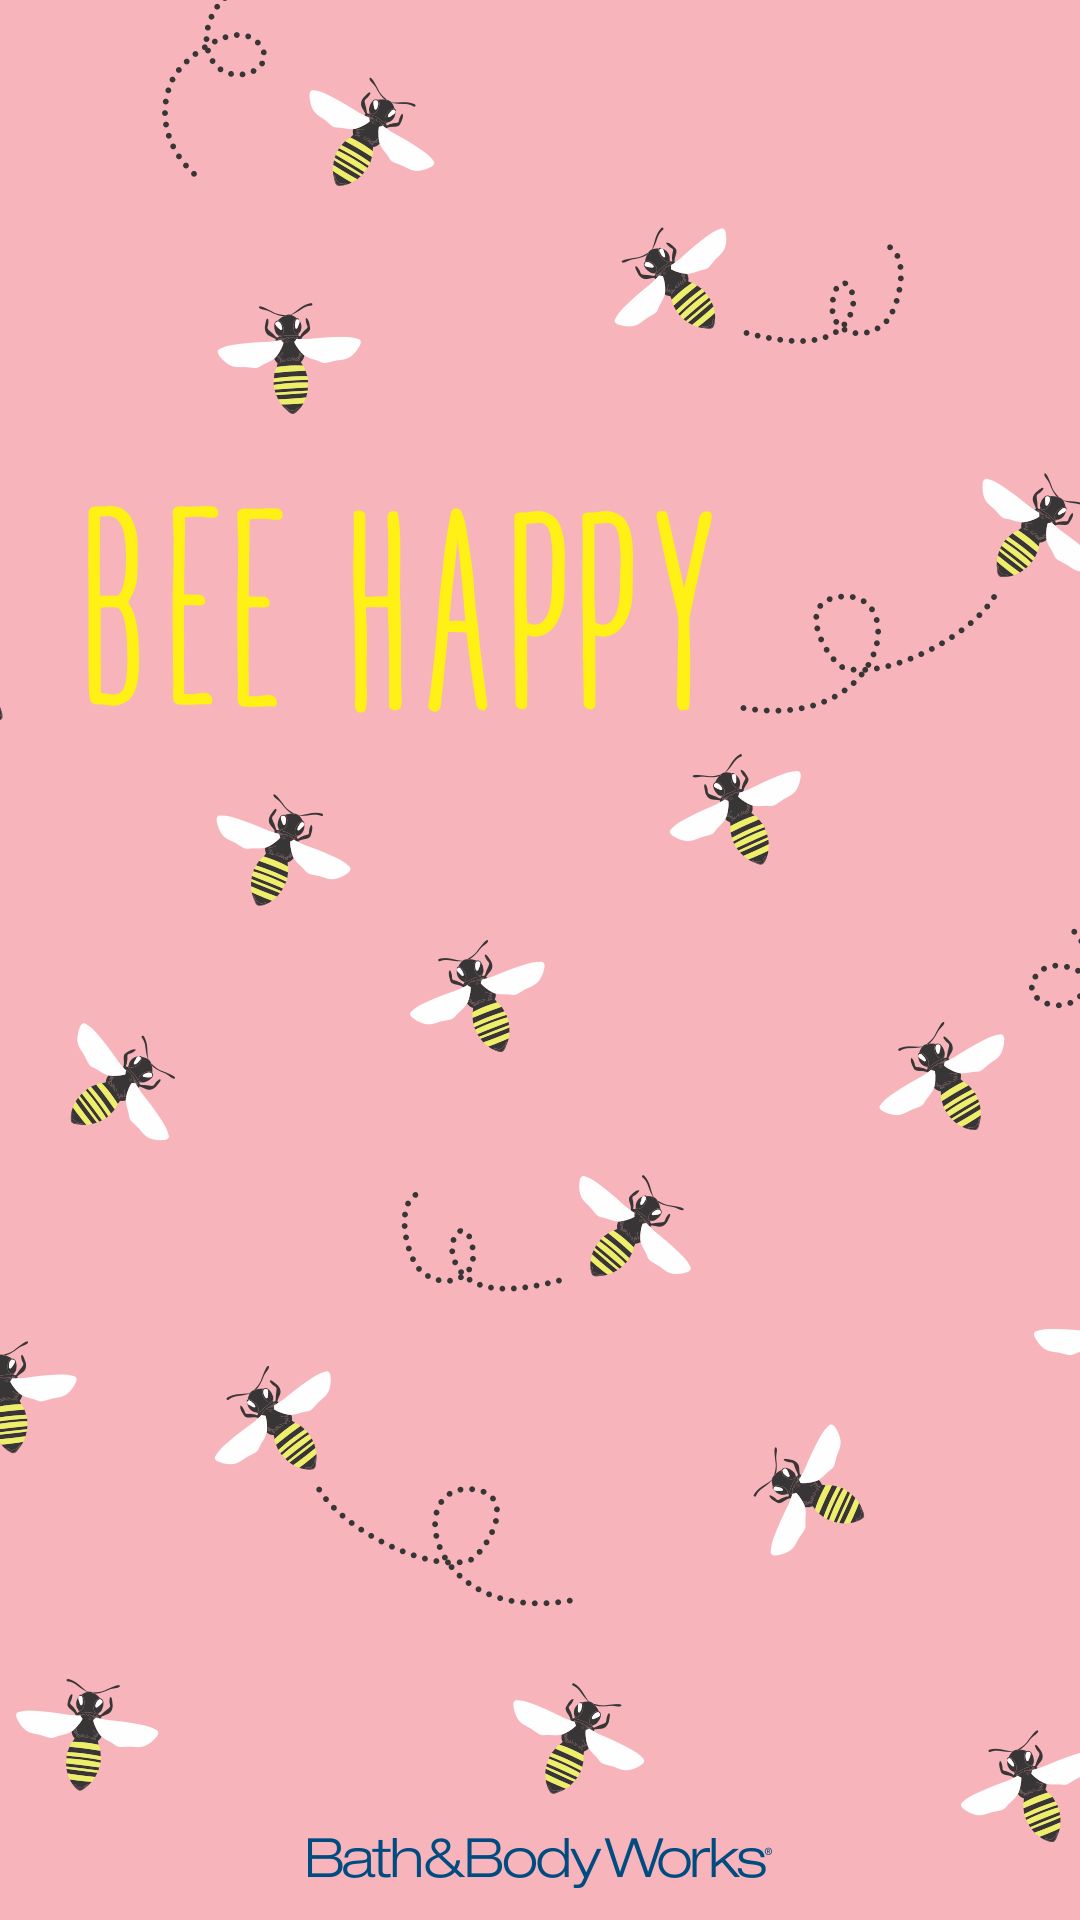 Bee Happy Cell Phone Wallpaper Background. Happy wallpaper, Bee happy, Words wallpaper